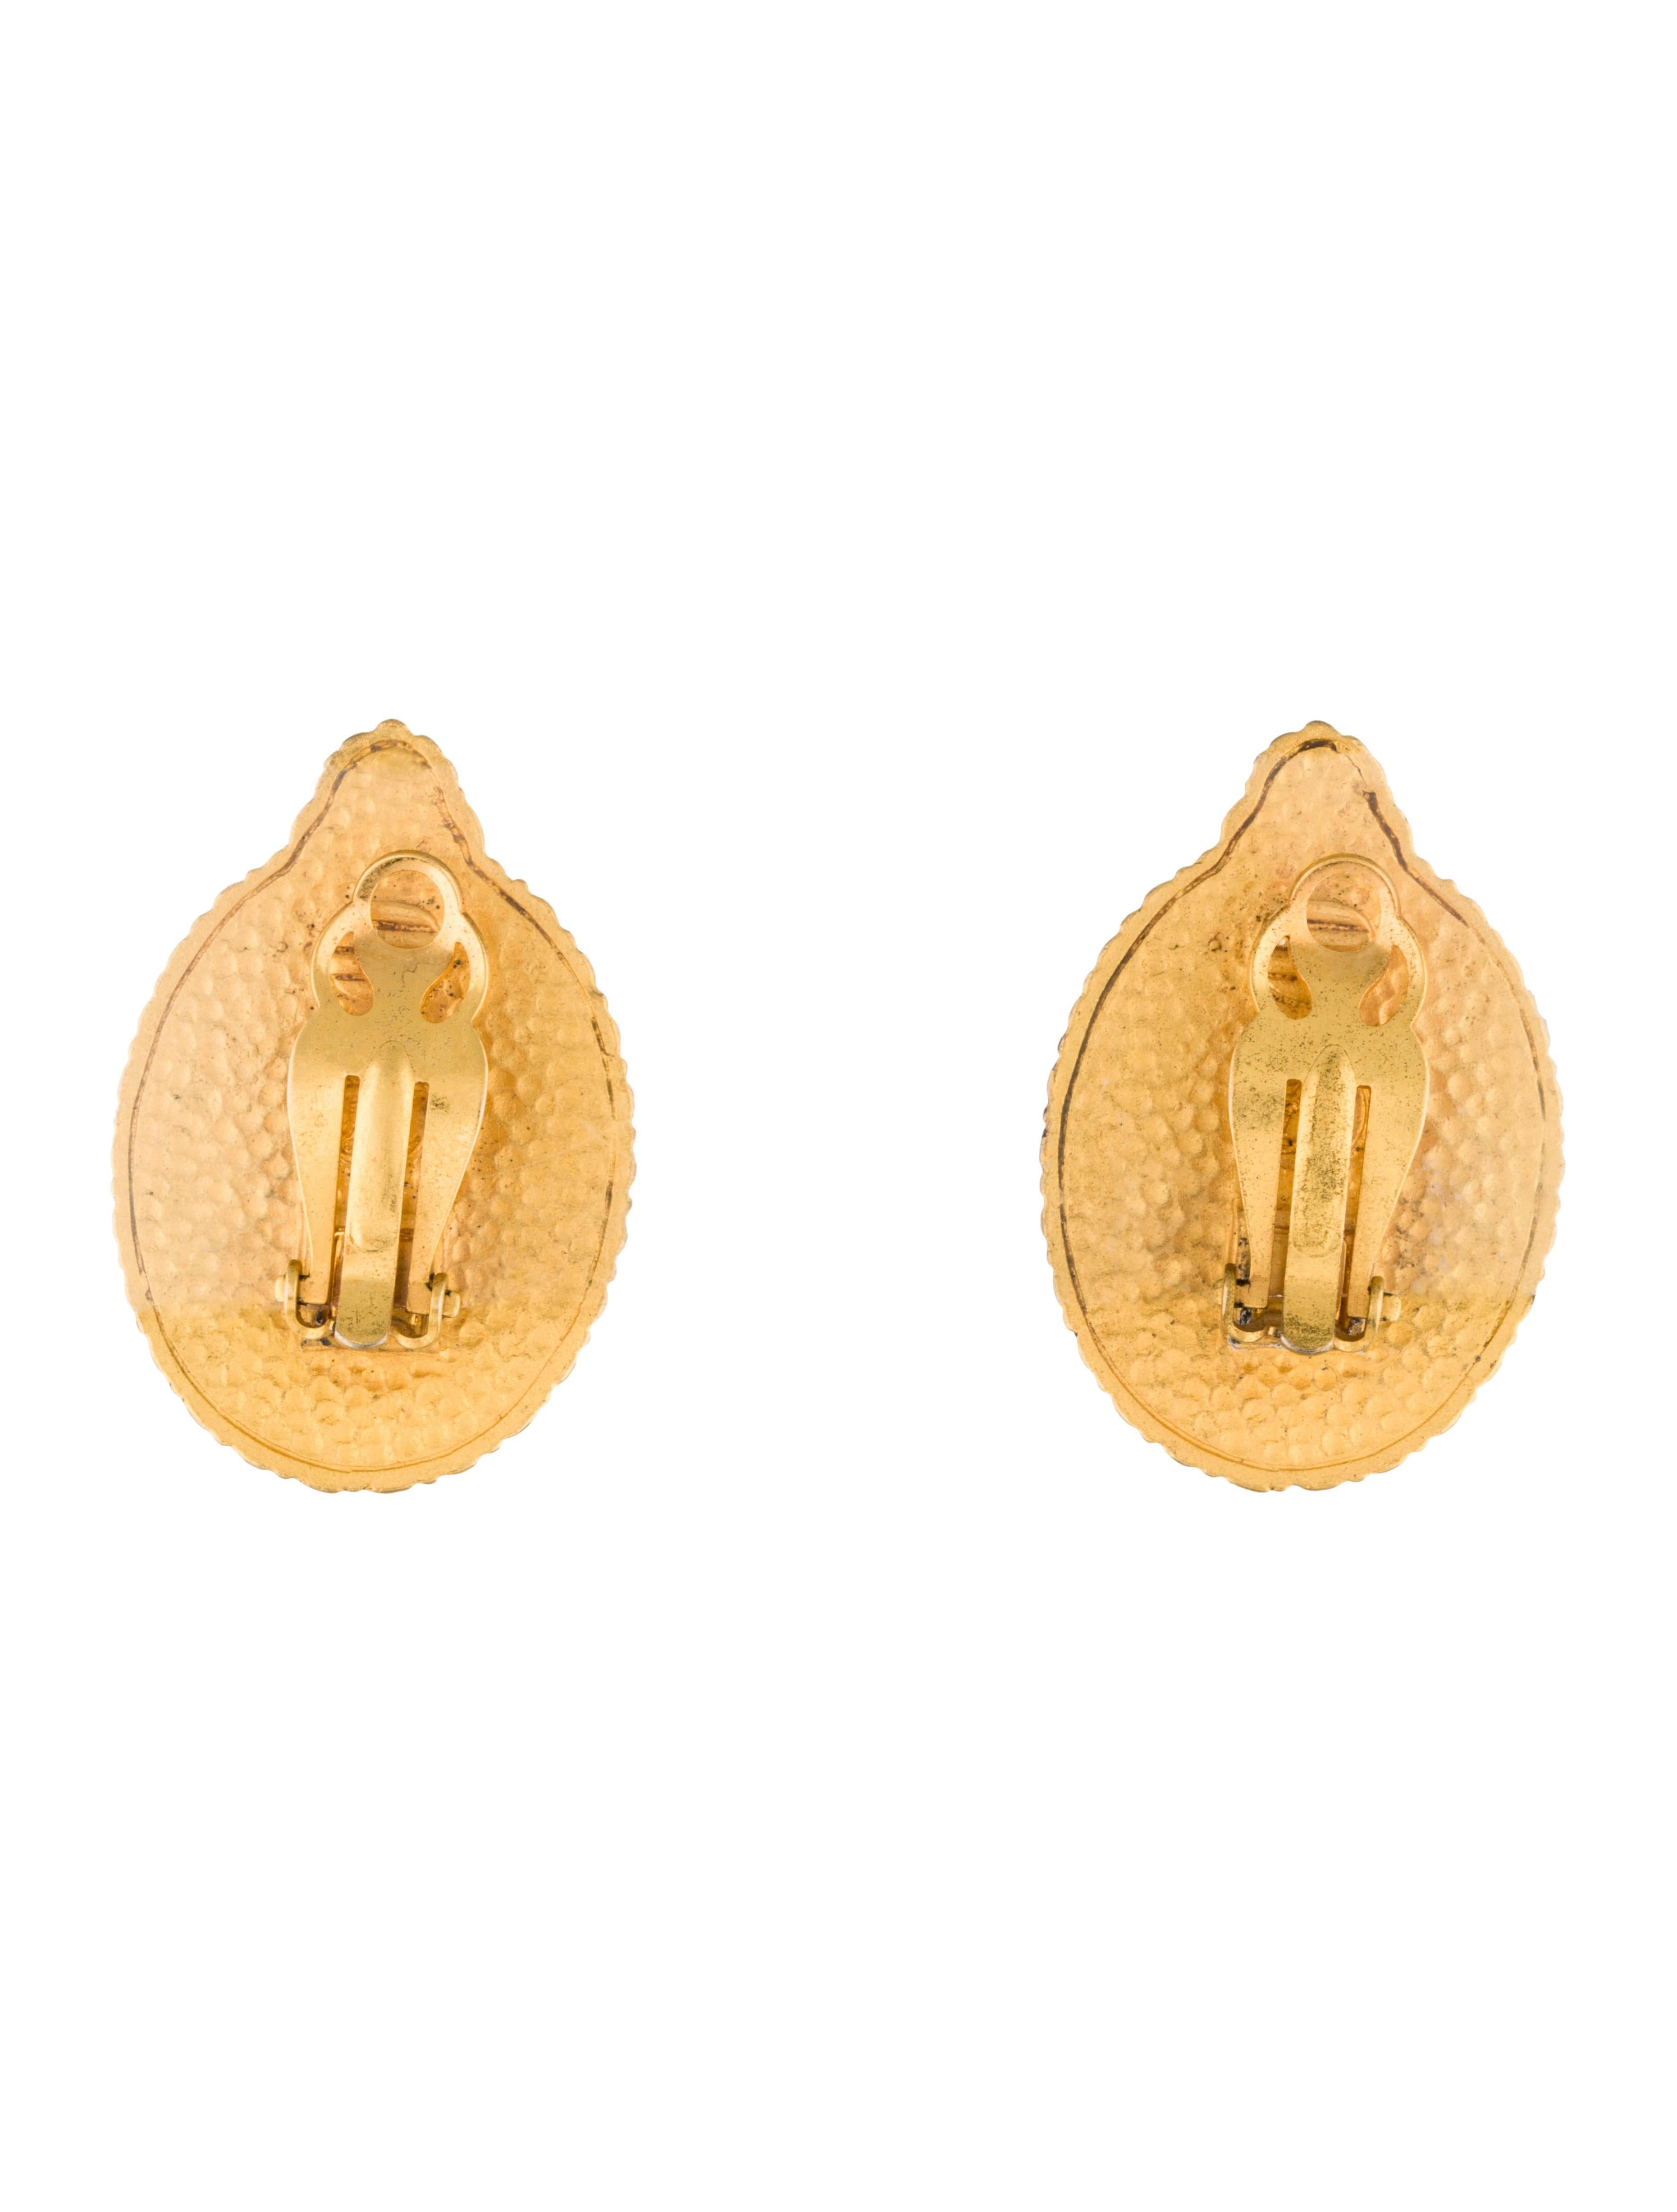 Karl Lagerfeld Gold Tone Mirror Earrings, 1990s In Excellent Condition In San Francisco, CA